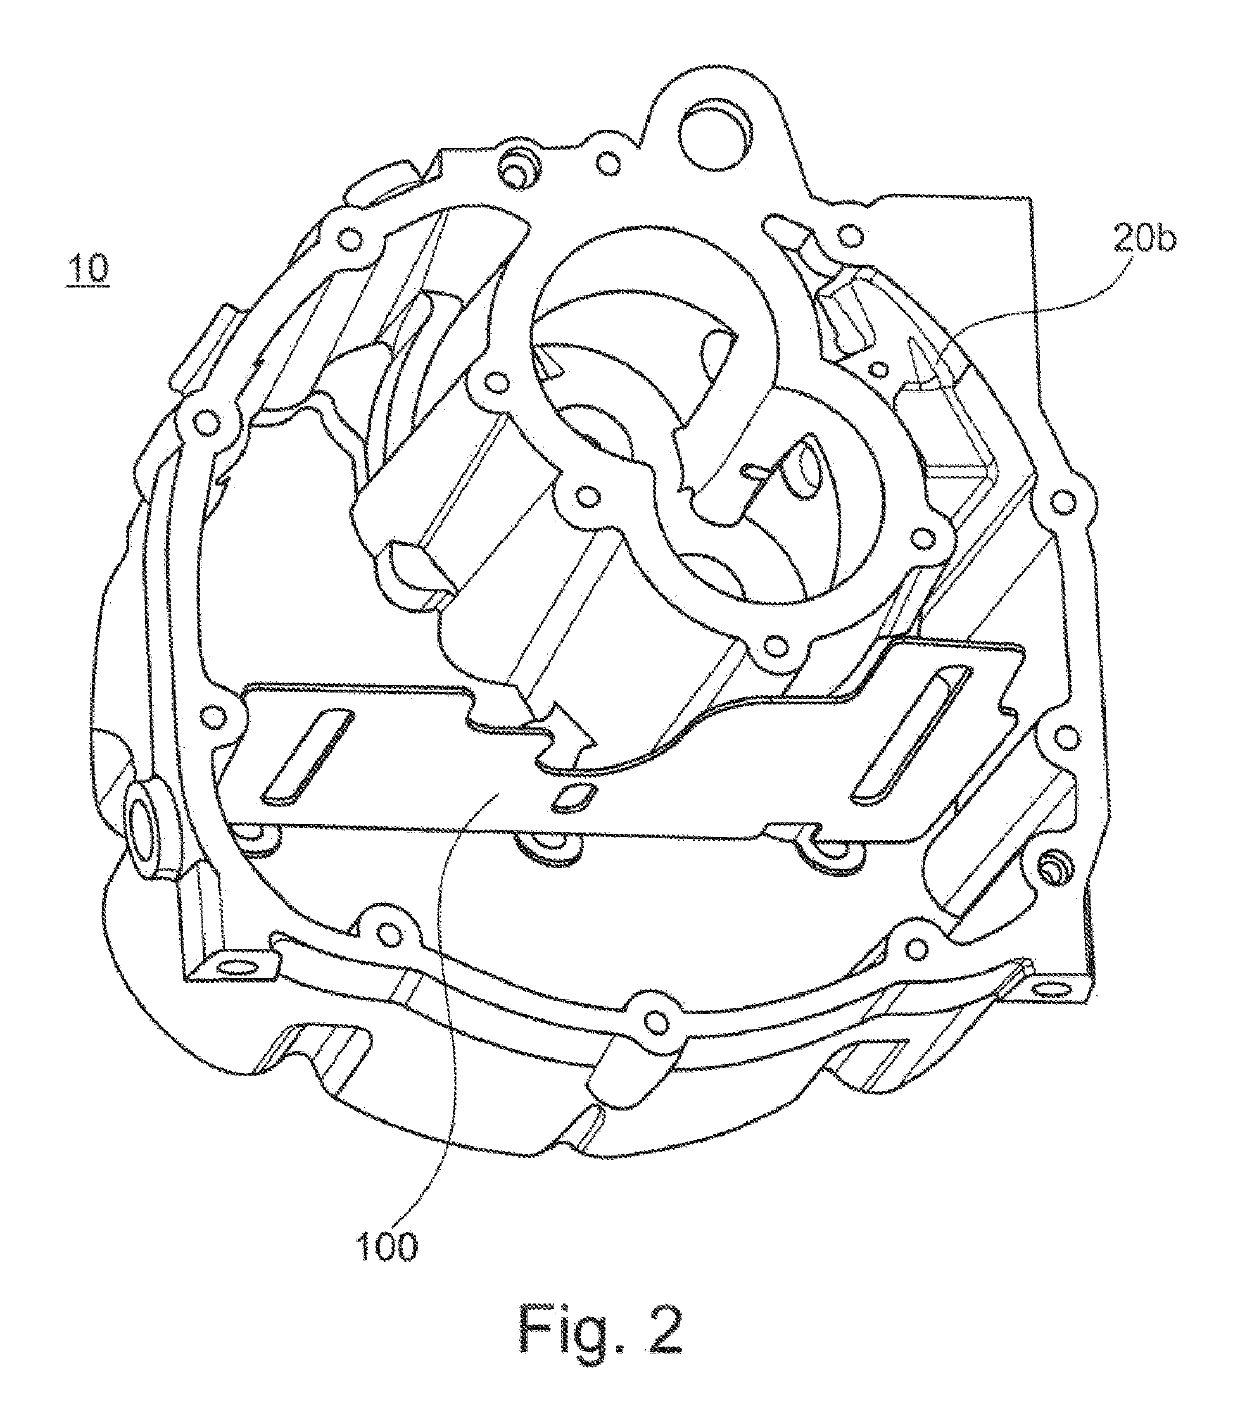 Arrangement for a Screw Compressor of a Utility Vehicle